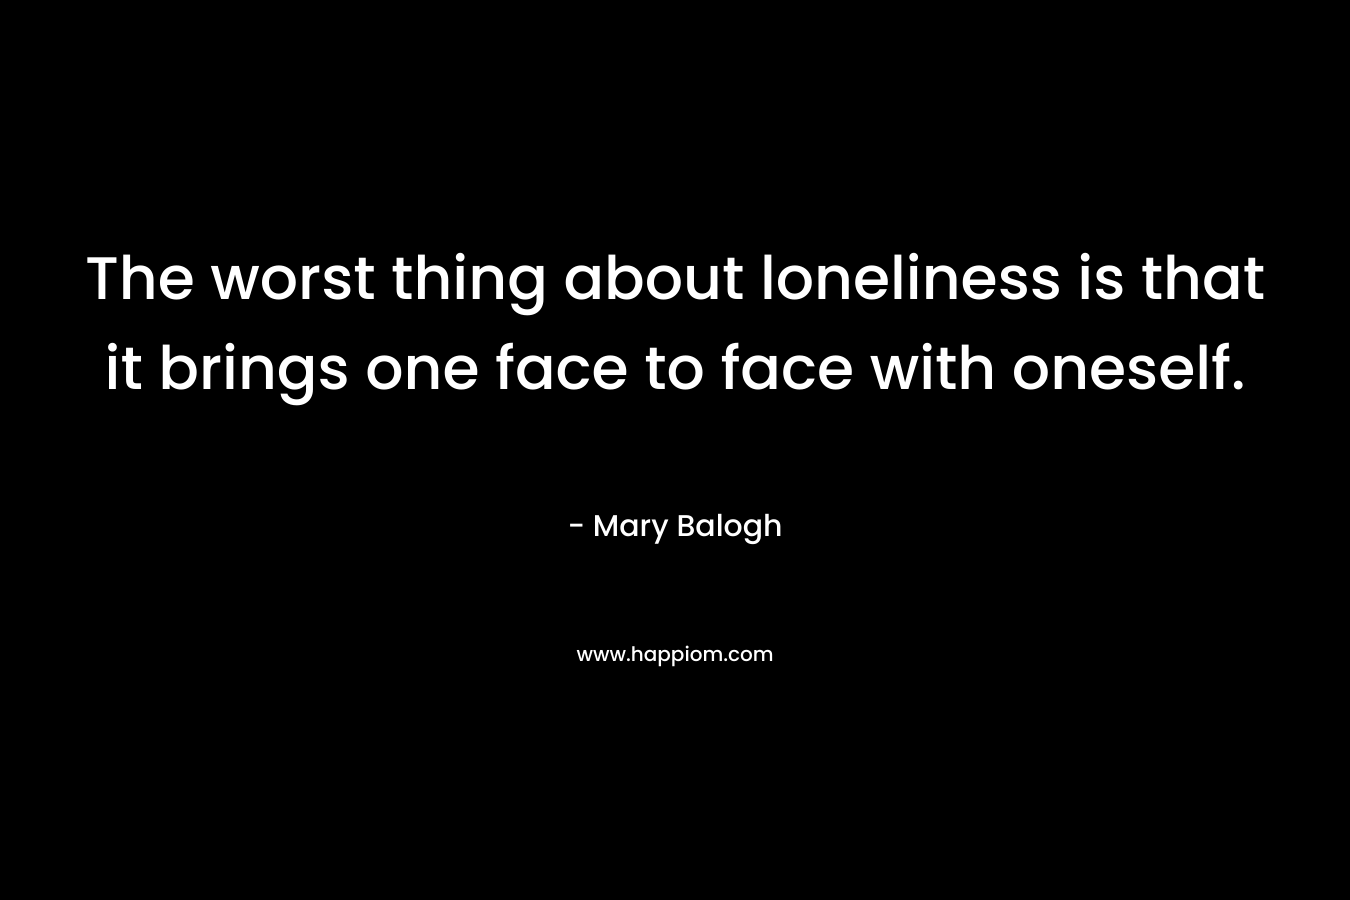 The worst thing about loneliness is that it brings one face to face with oneself.